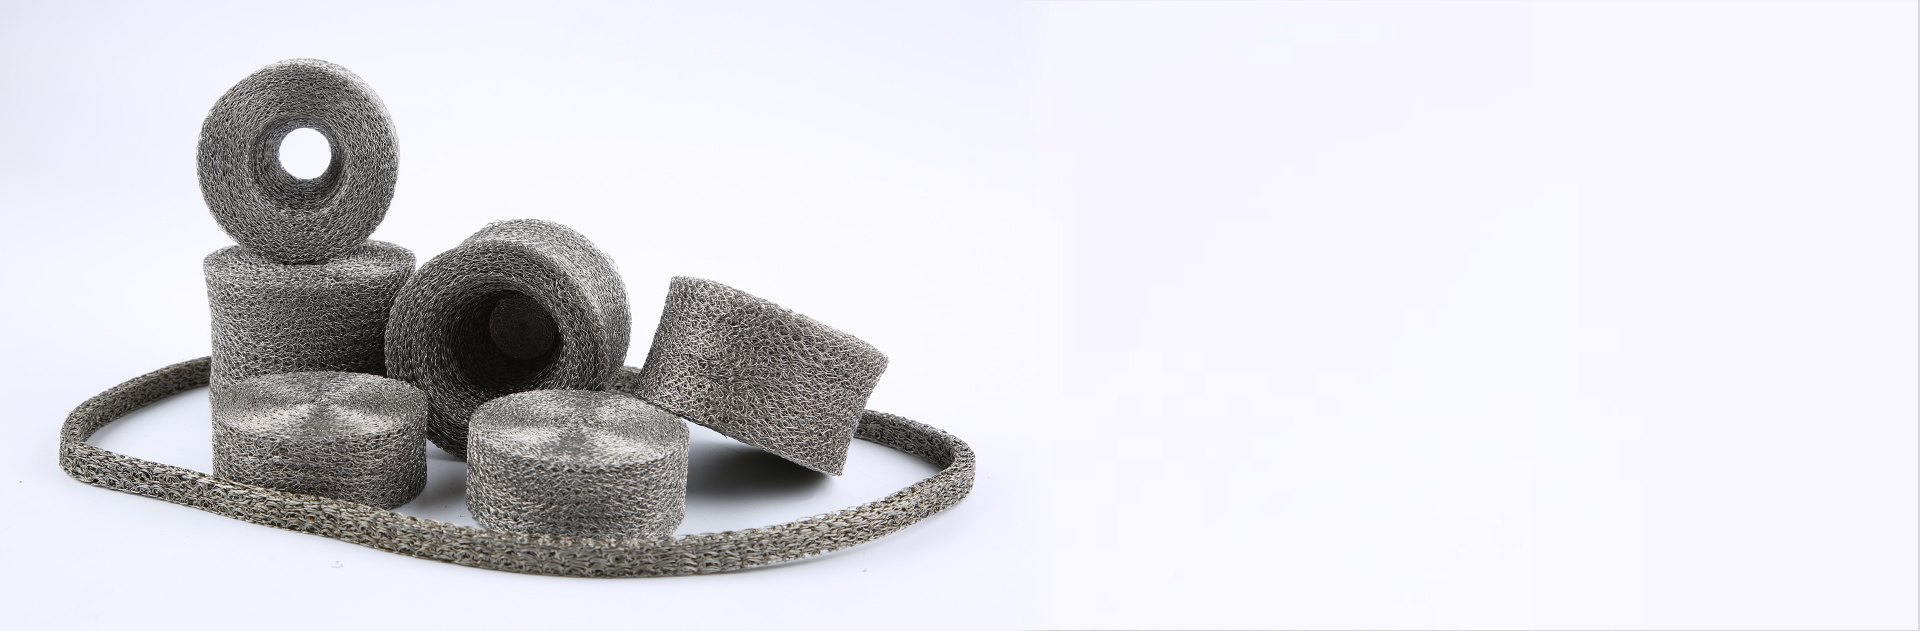 Several different shapes and specs of compressed knitted mesh on the gray background.